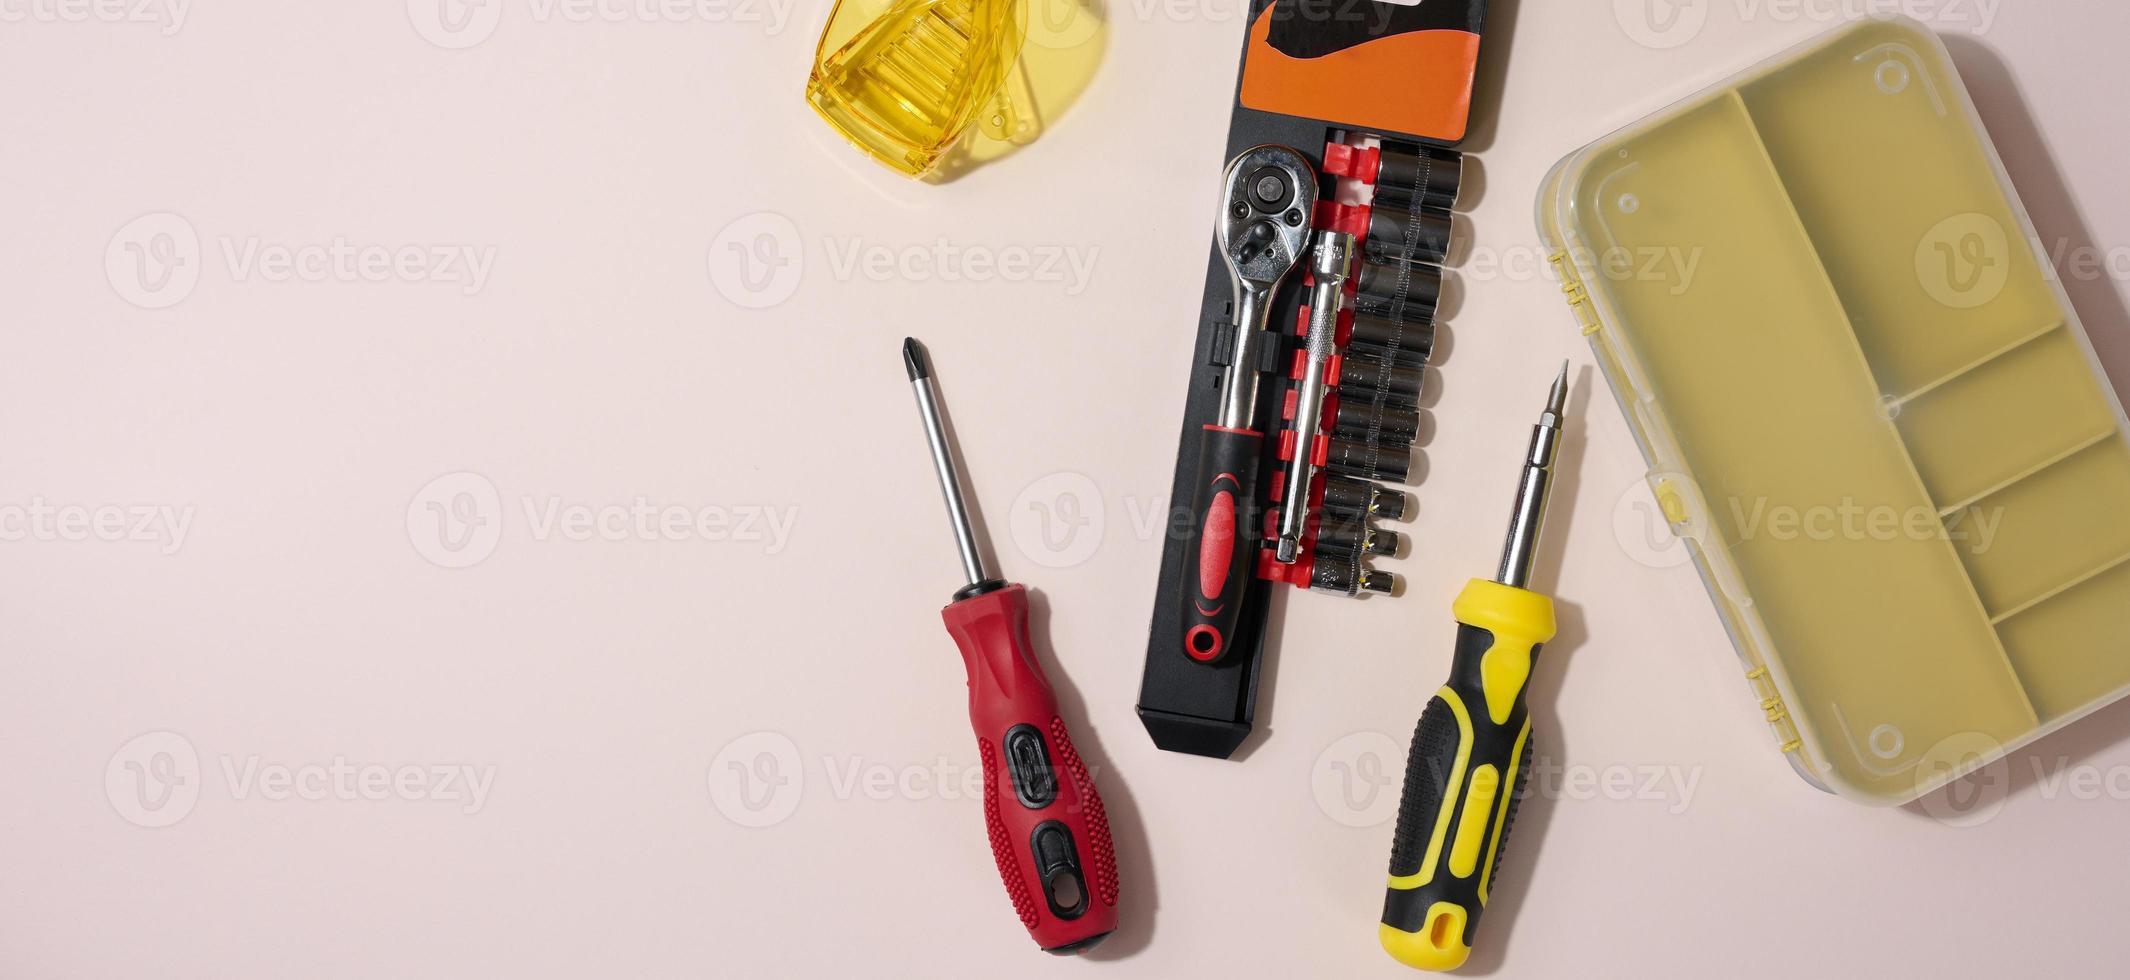 Transparent acrylic glasses and a screwdriver on a beige background, top view photo